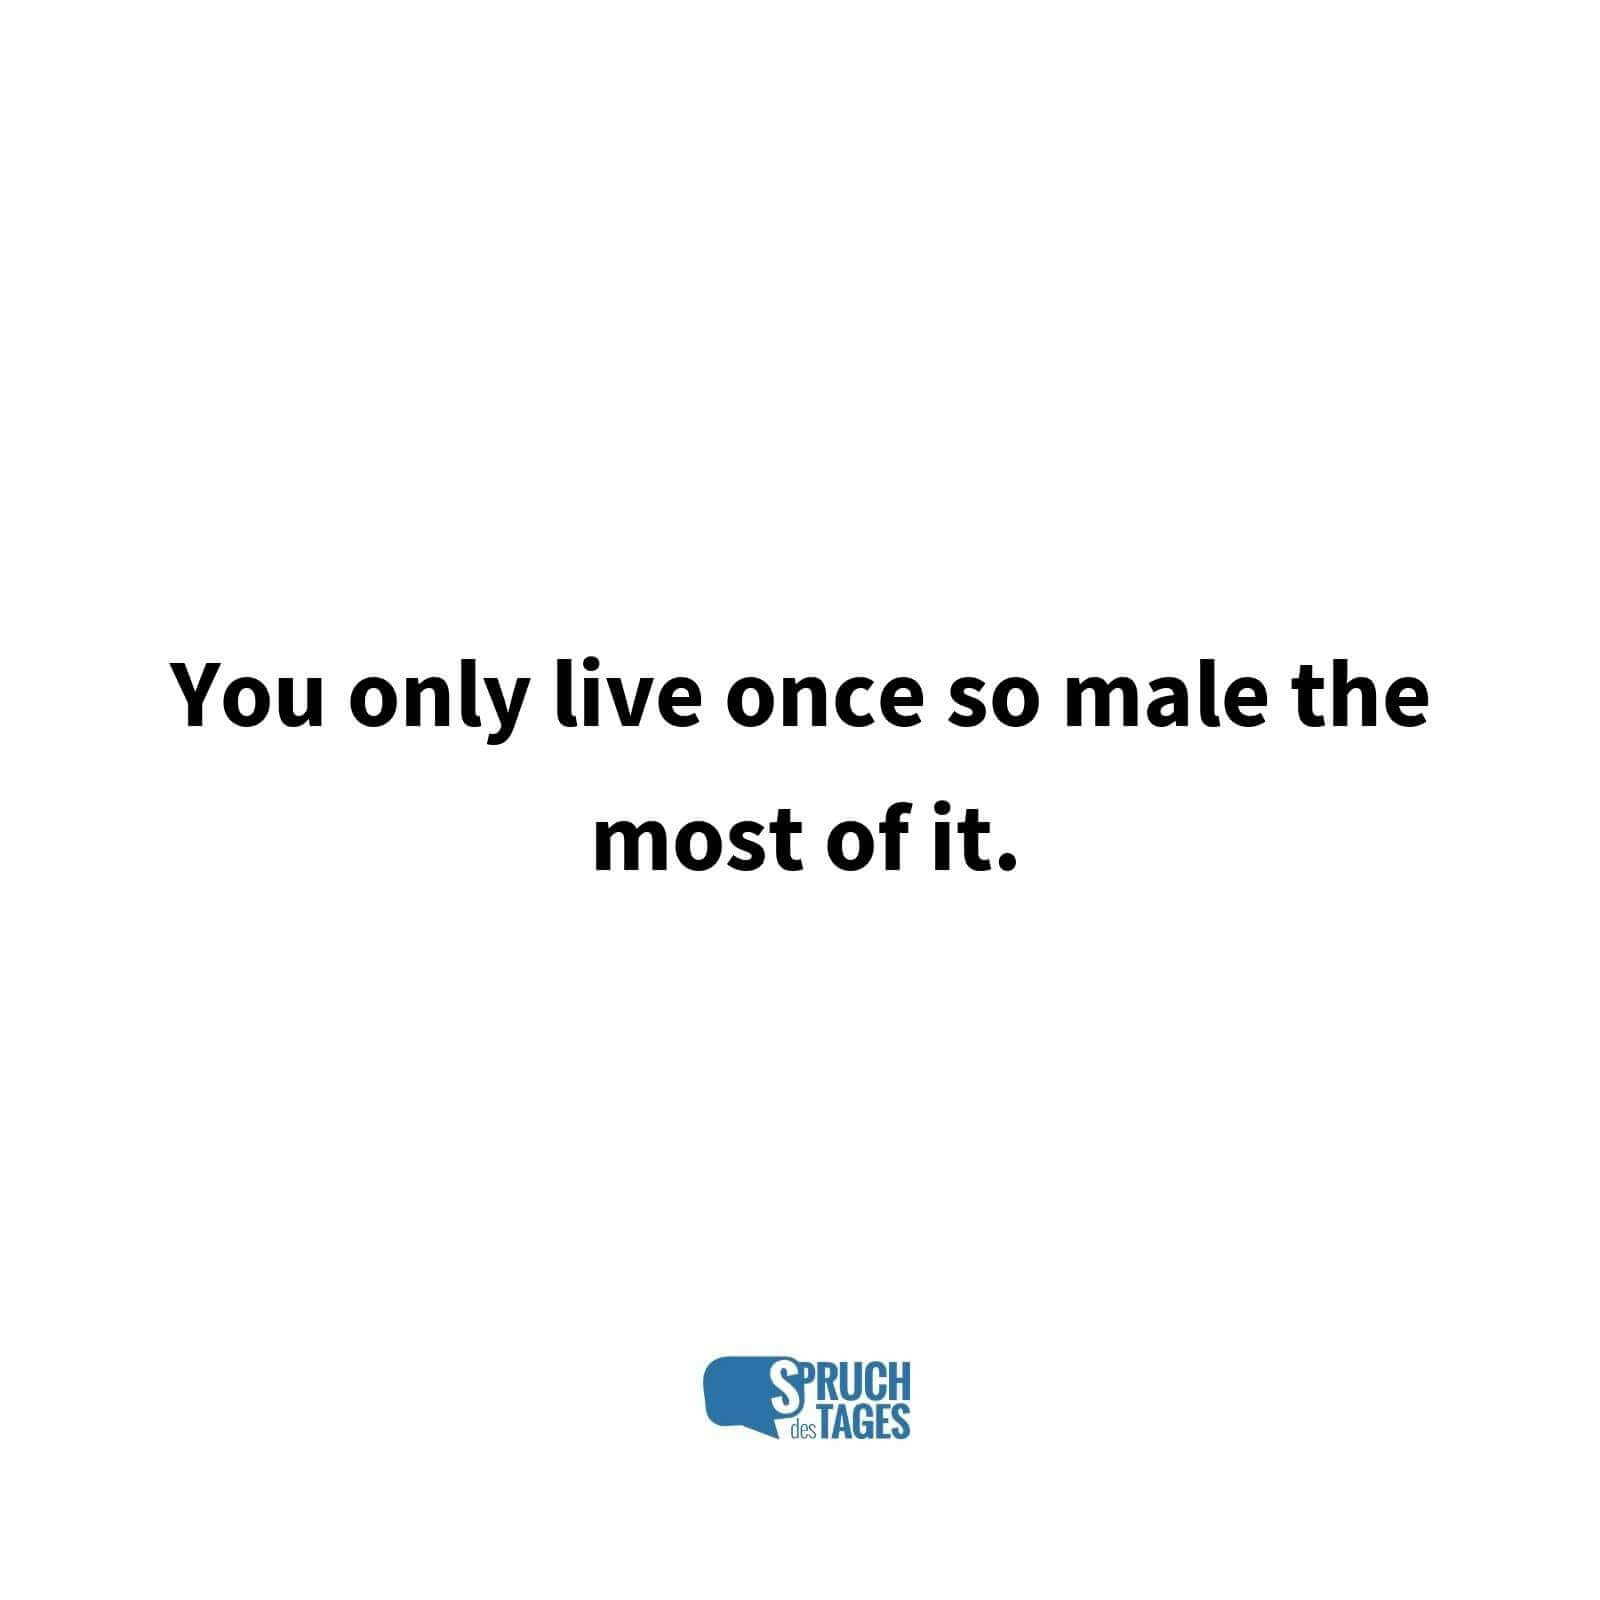 You only live once so male the most of it.